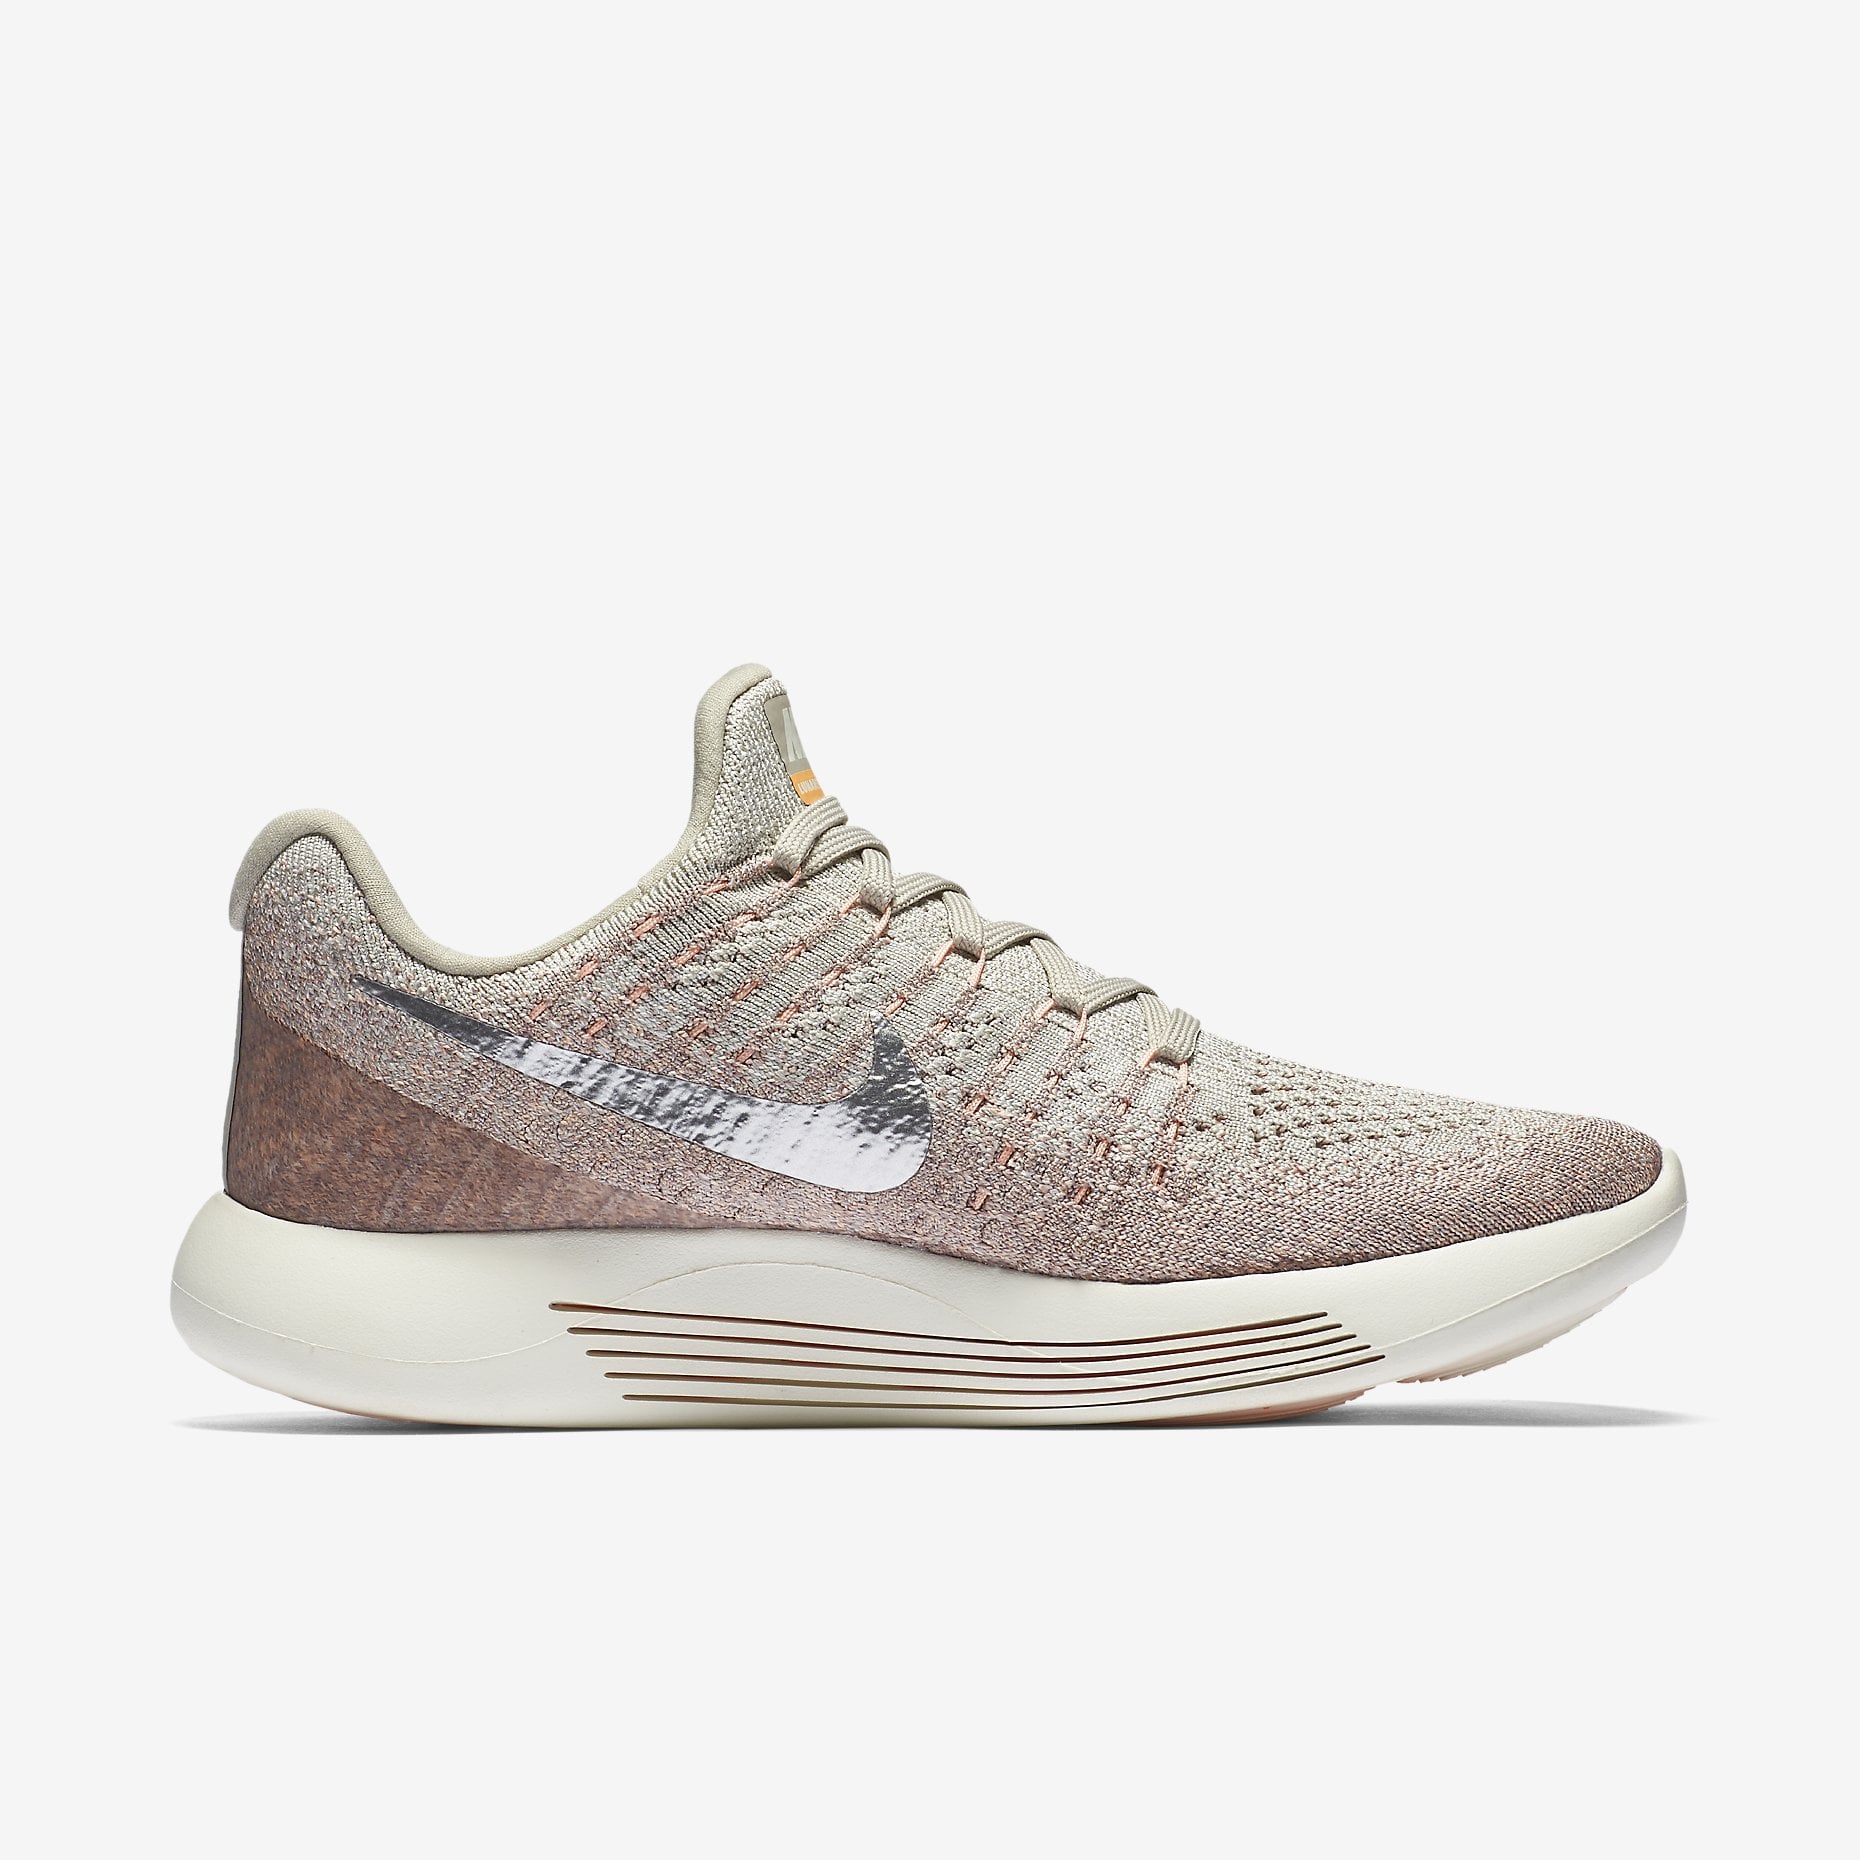 Nike LunarEpic Flyknit 2 Running Shoe ($140) | Nike's Millennial Pink Collection Packs Punch | POPSUGAR Fitness Photo 9